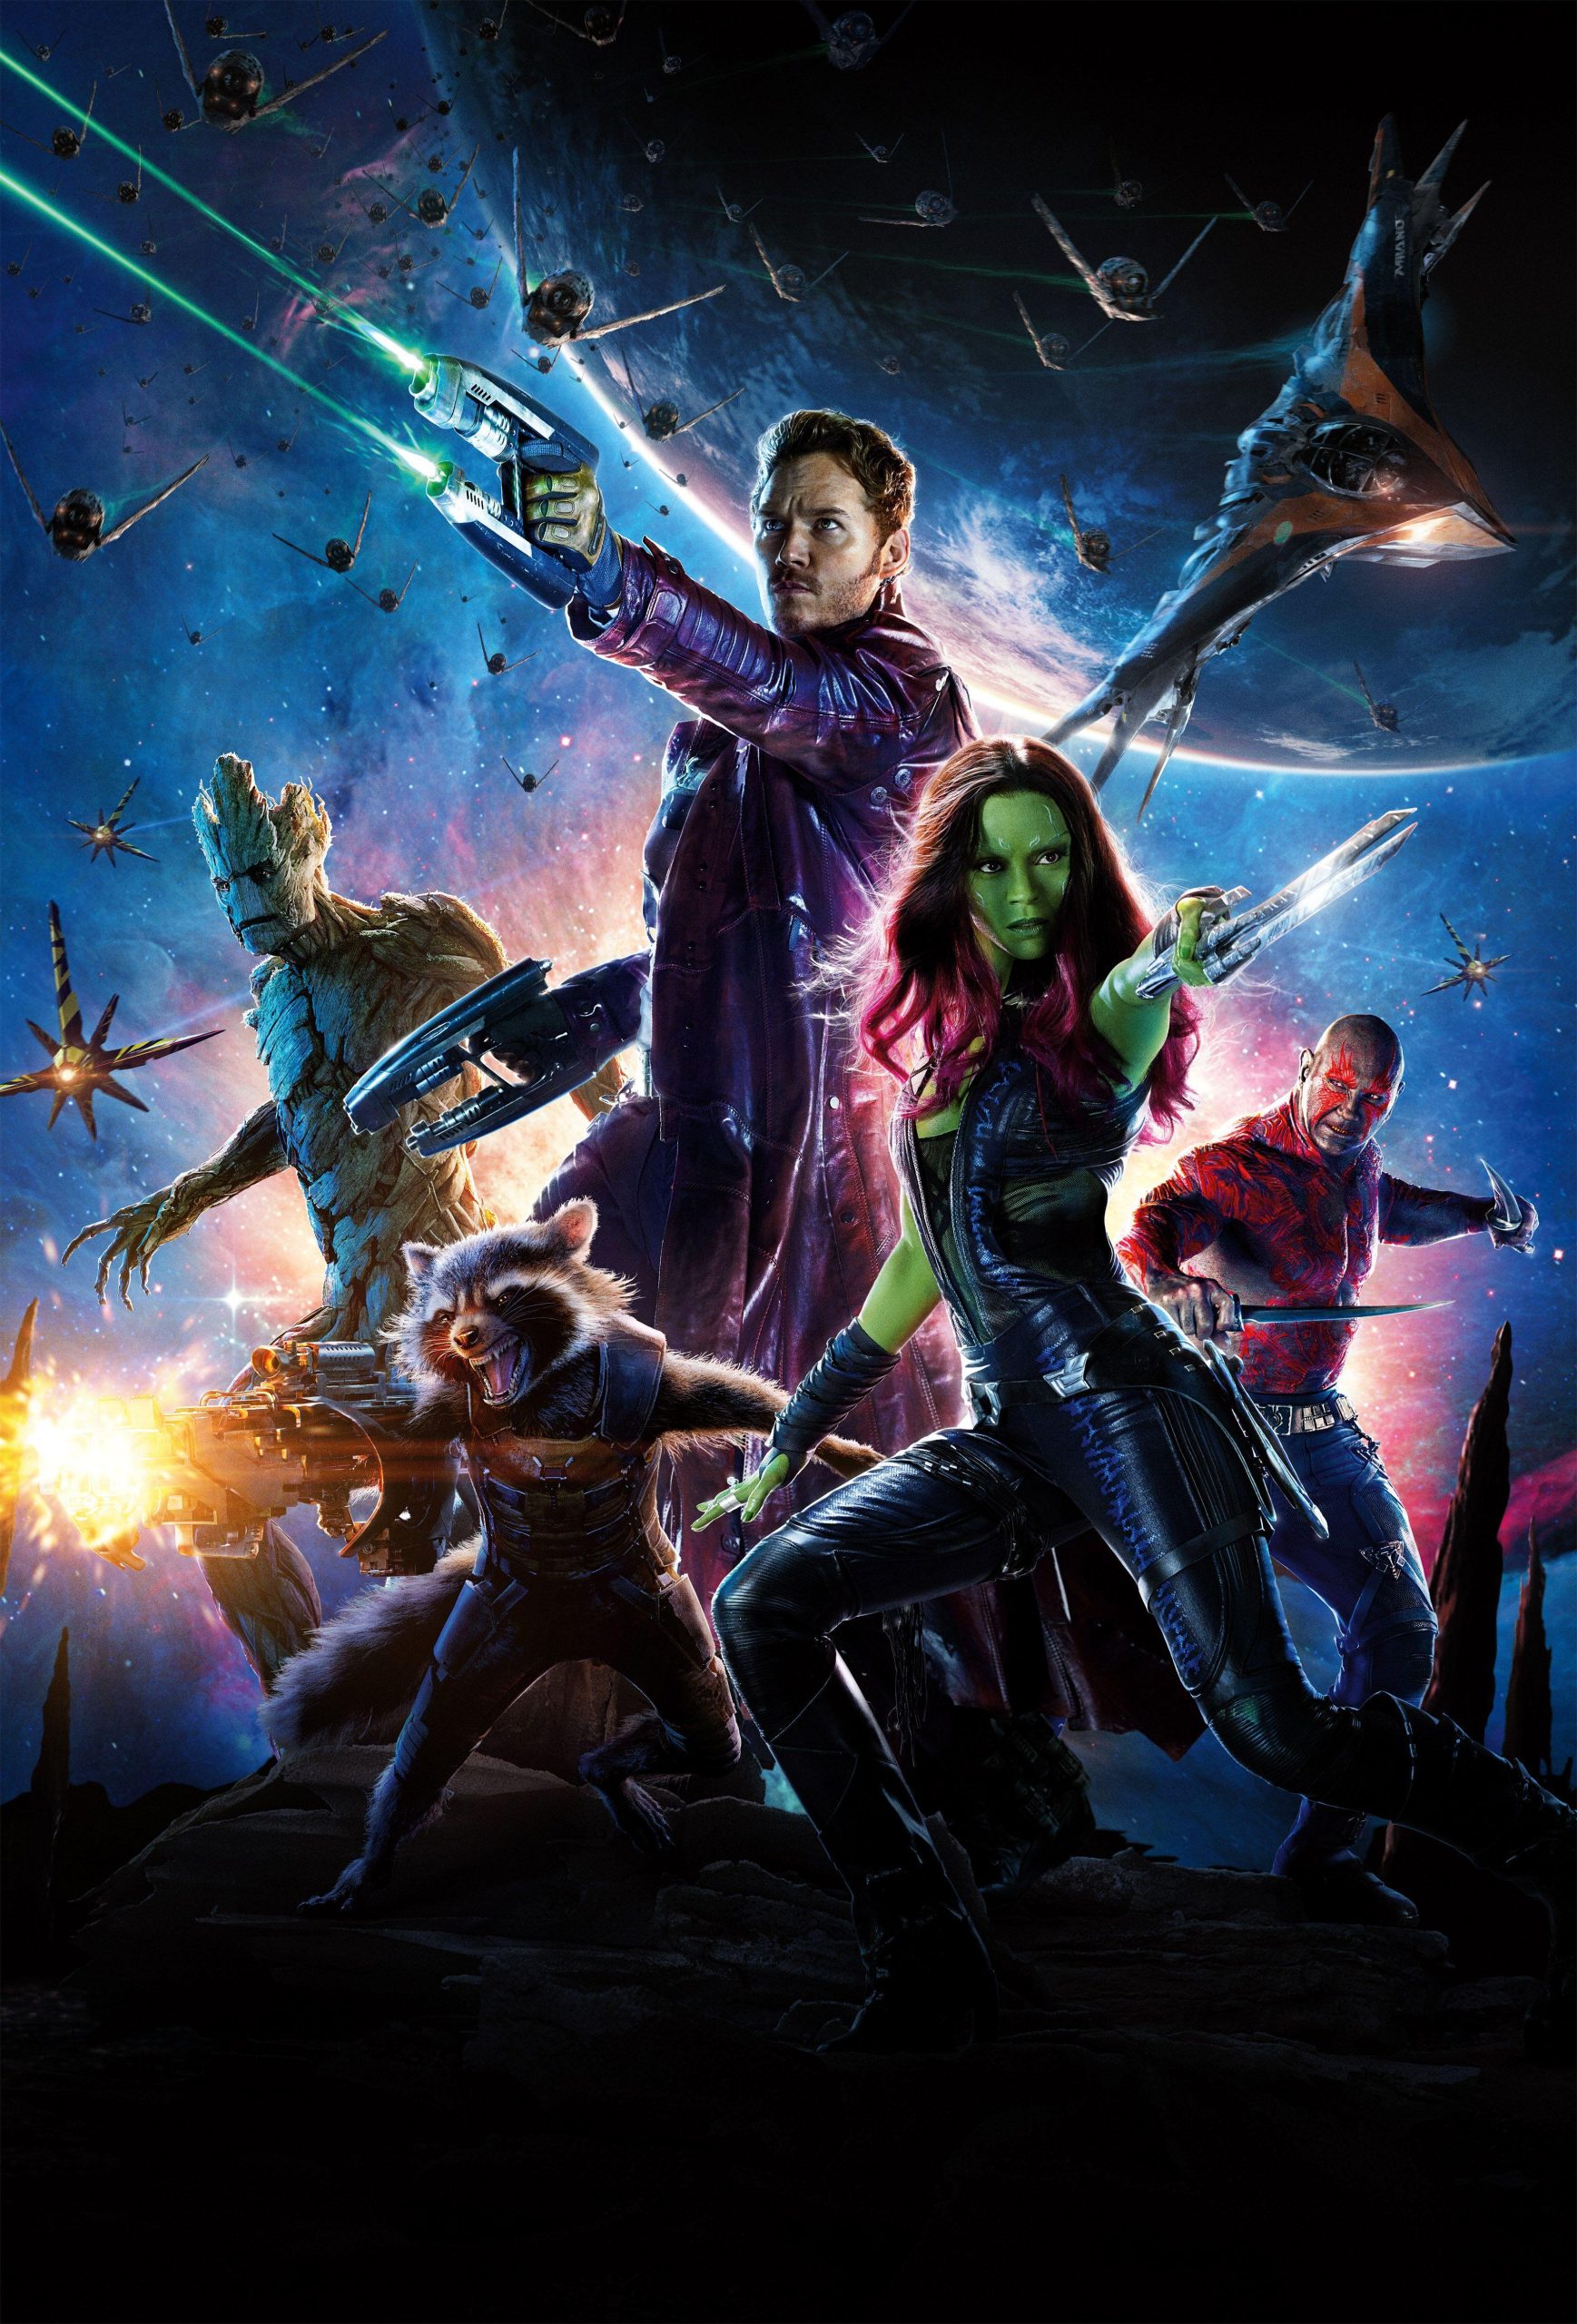 Guardians Of The Galaxy Star-Lord New Wallpaper, Guardians Of The Galaxy Star-Lord, Movies